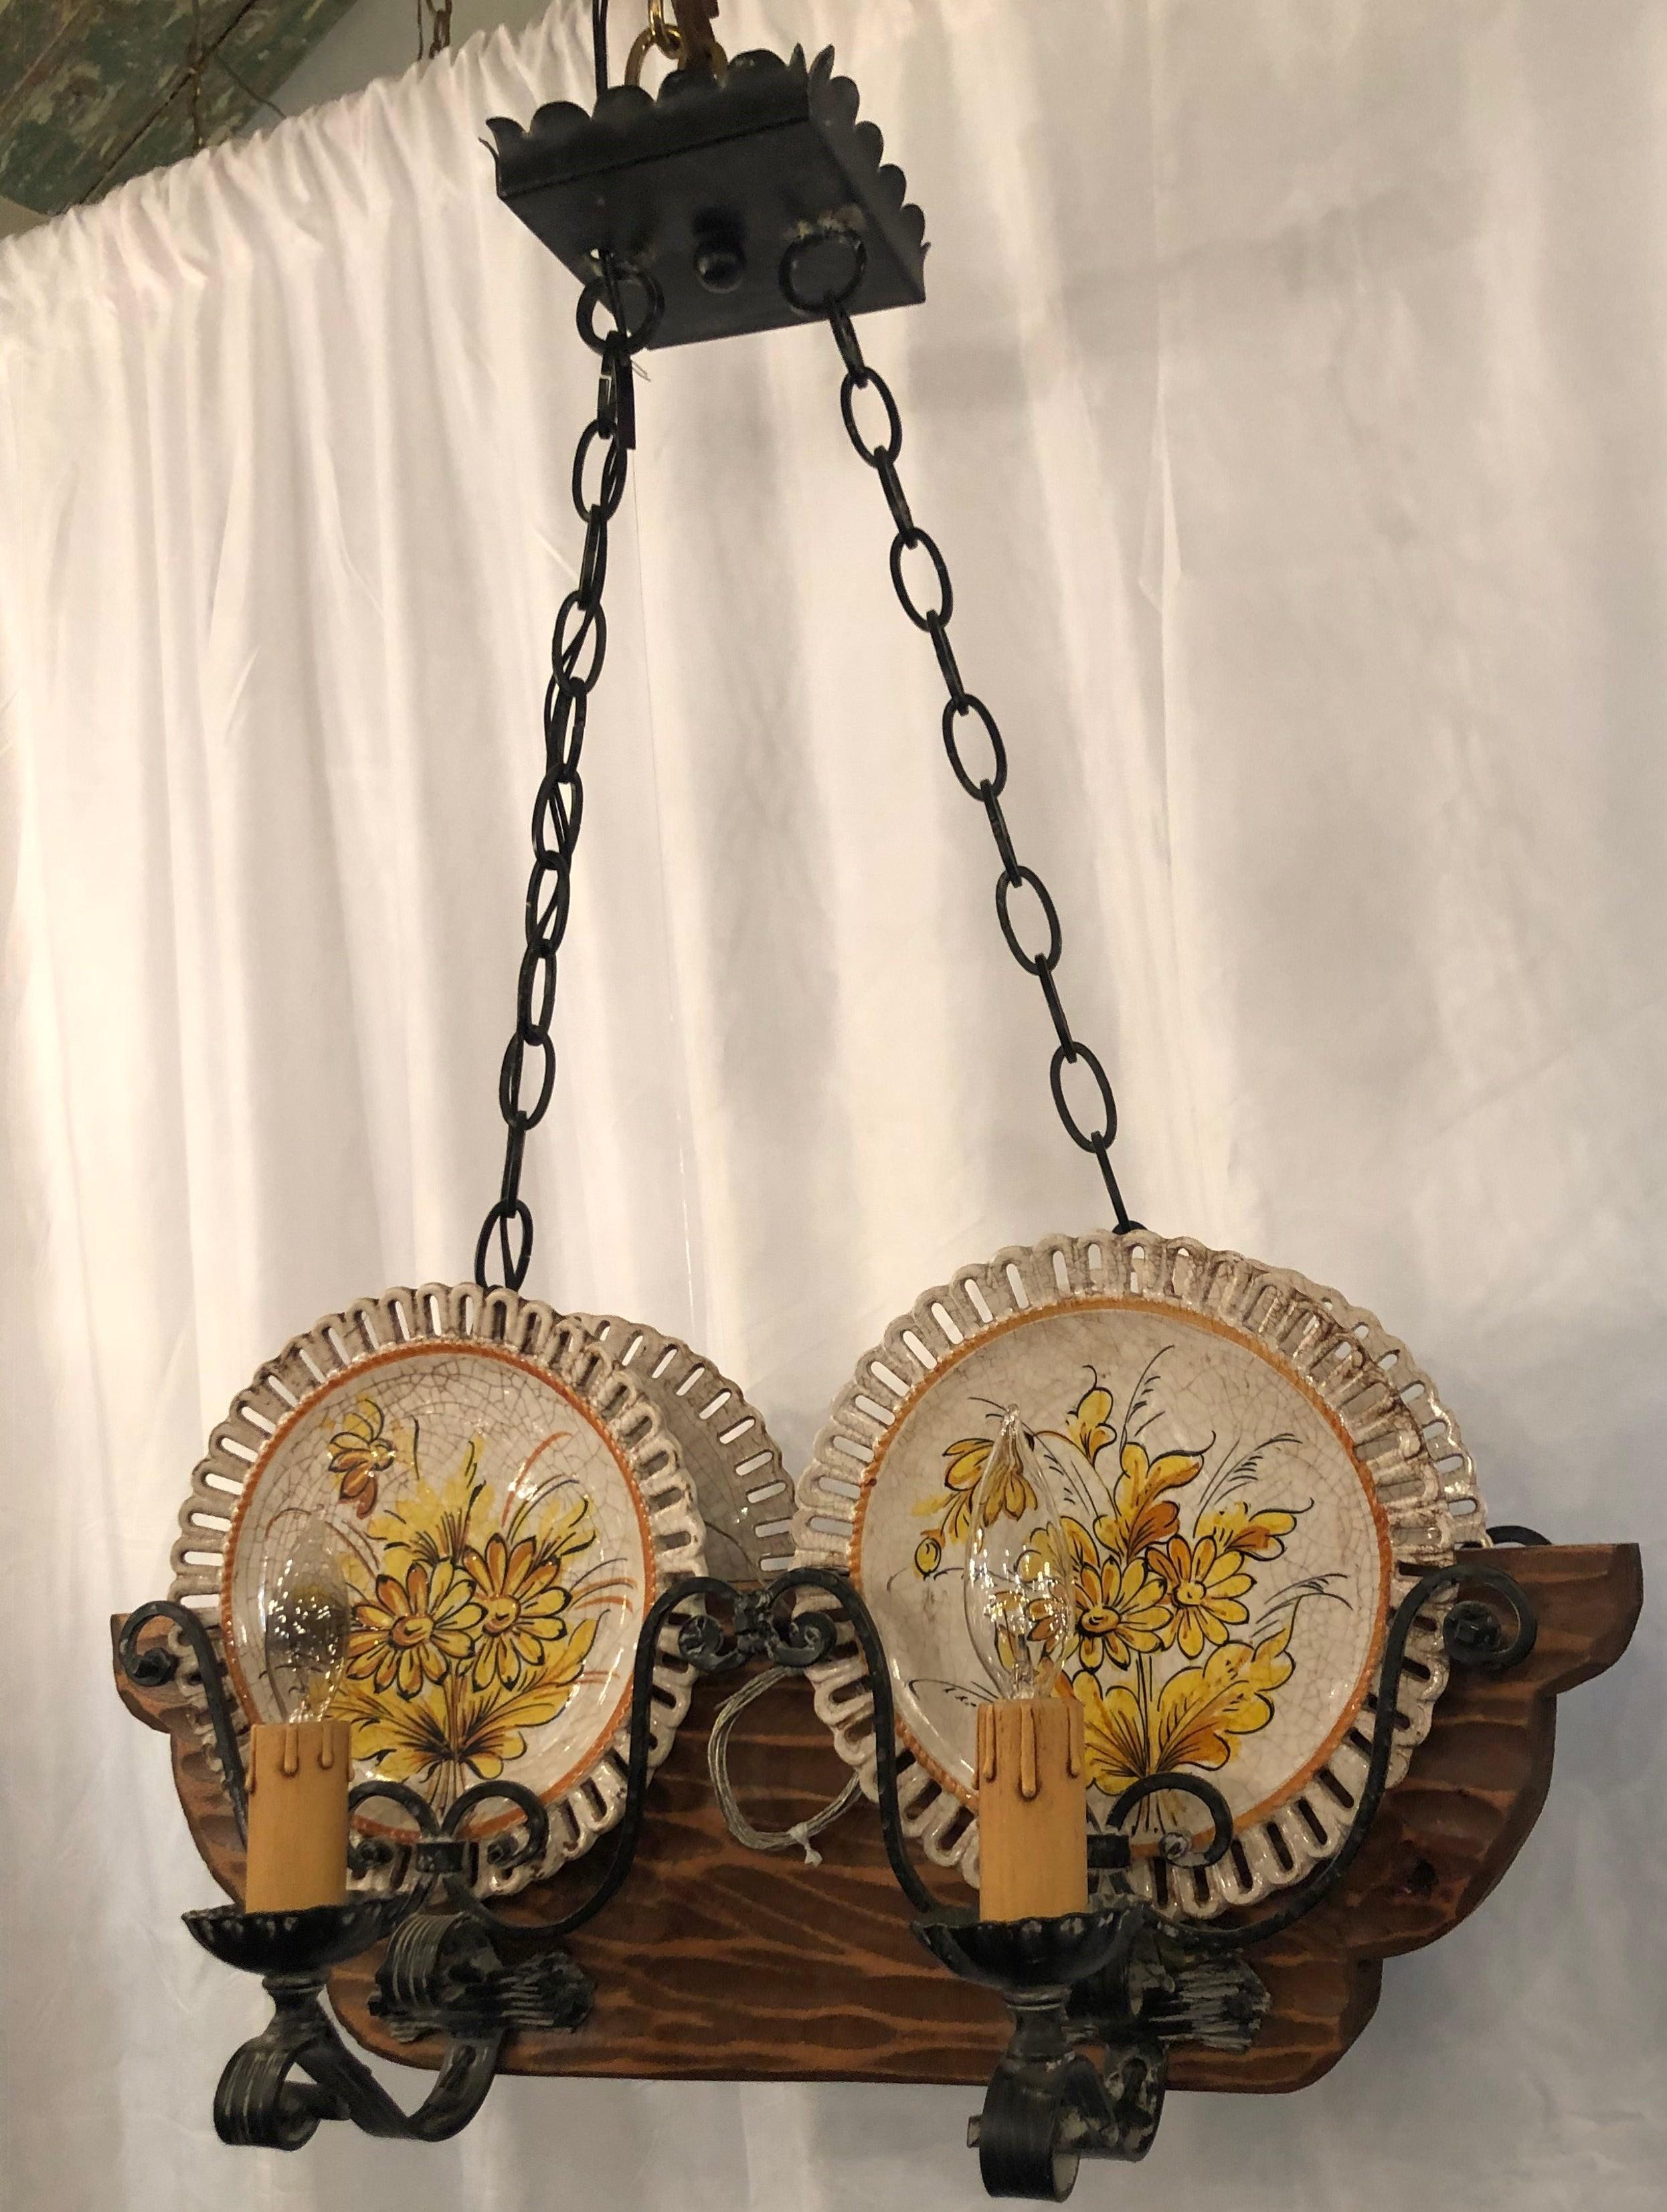 Metal Hand-Made Wrought Iron and Carved Wood Porcelain Plate-Holder Chandelier For Sale